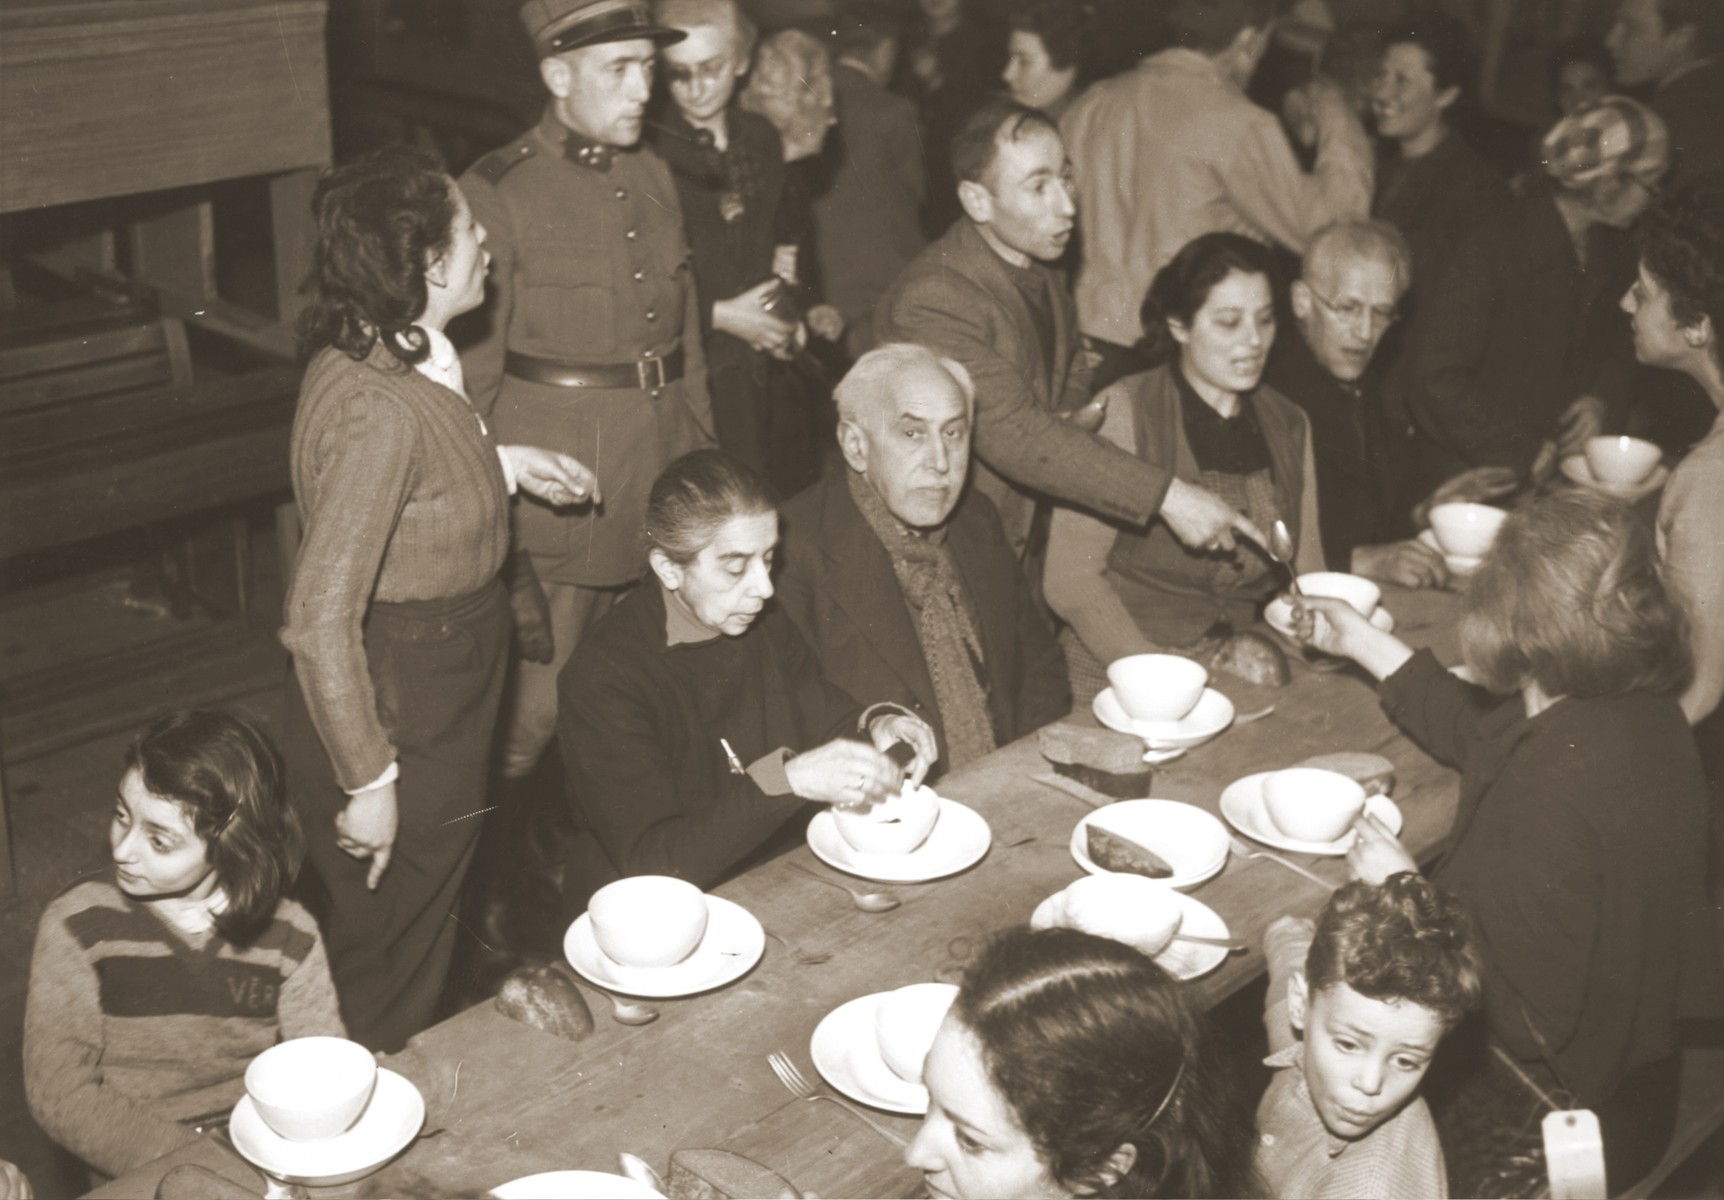 Jews rescued from Theresienstadt enjoy a warm meal in the Hadwigschulhaus in St. Gallen.